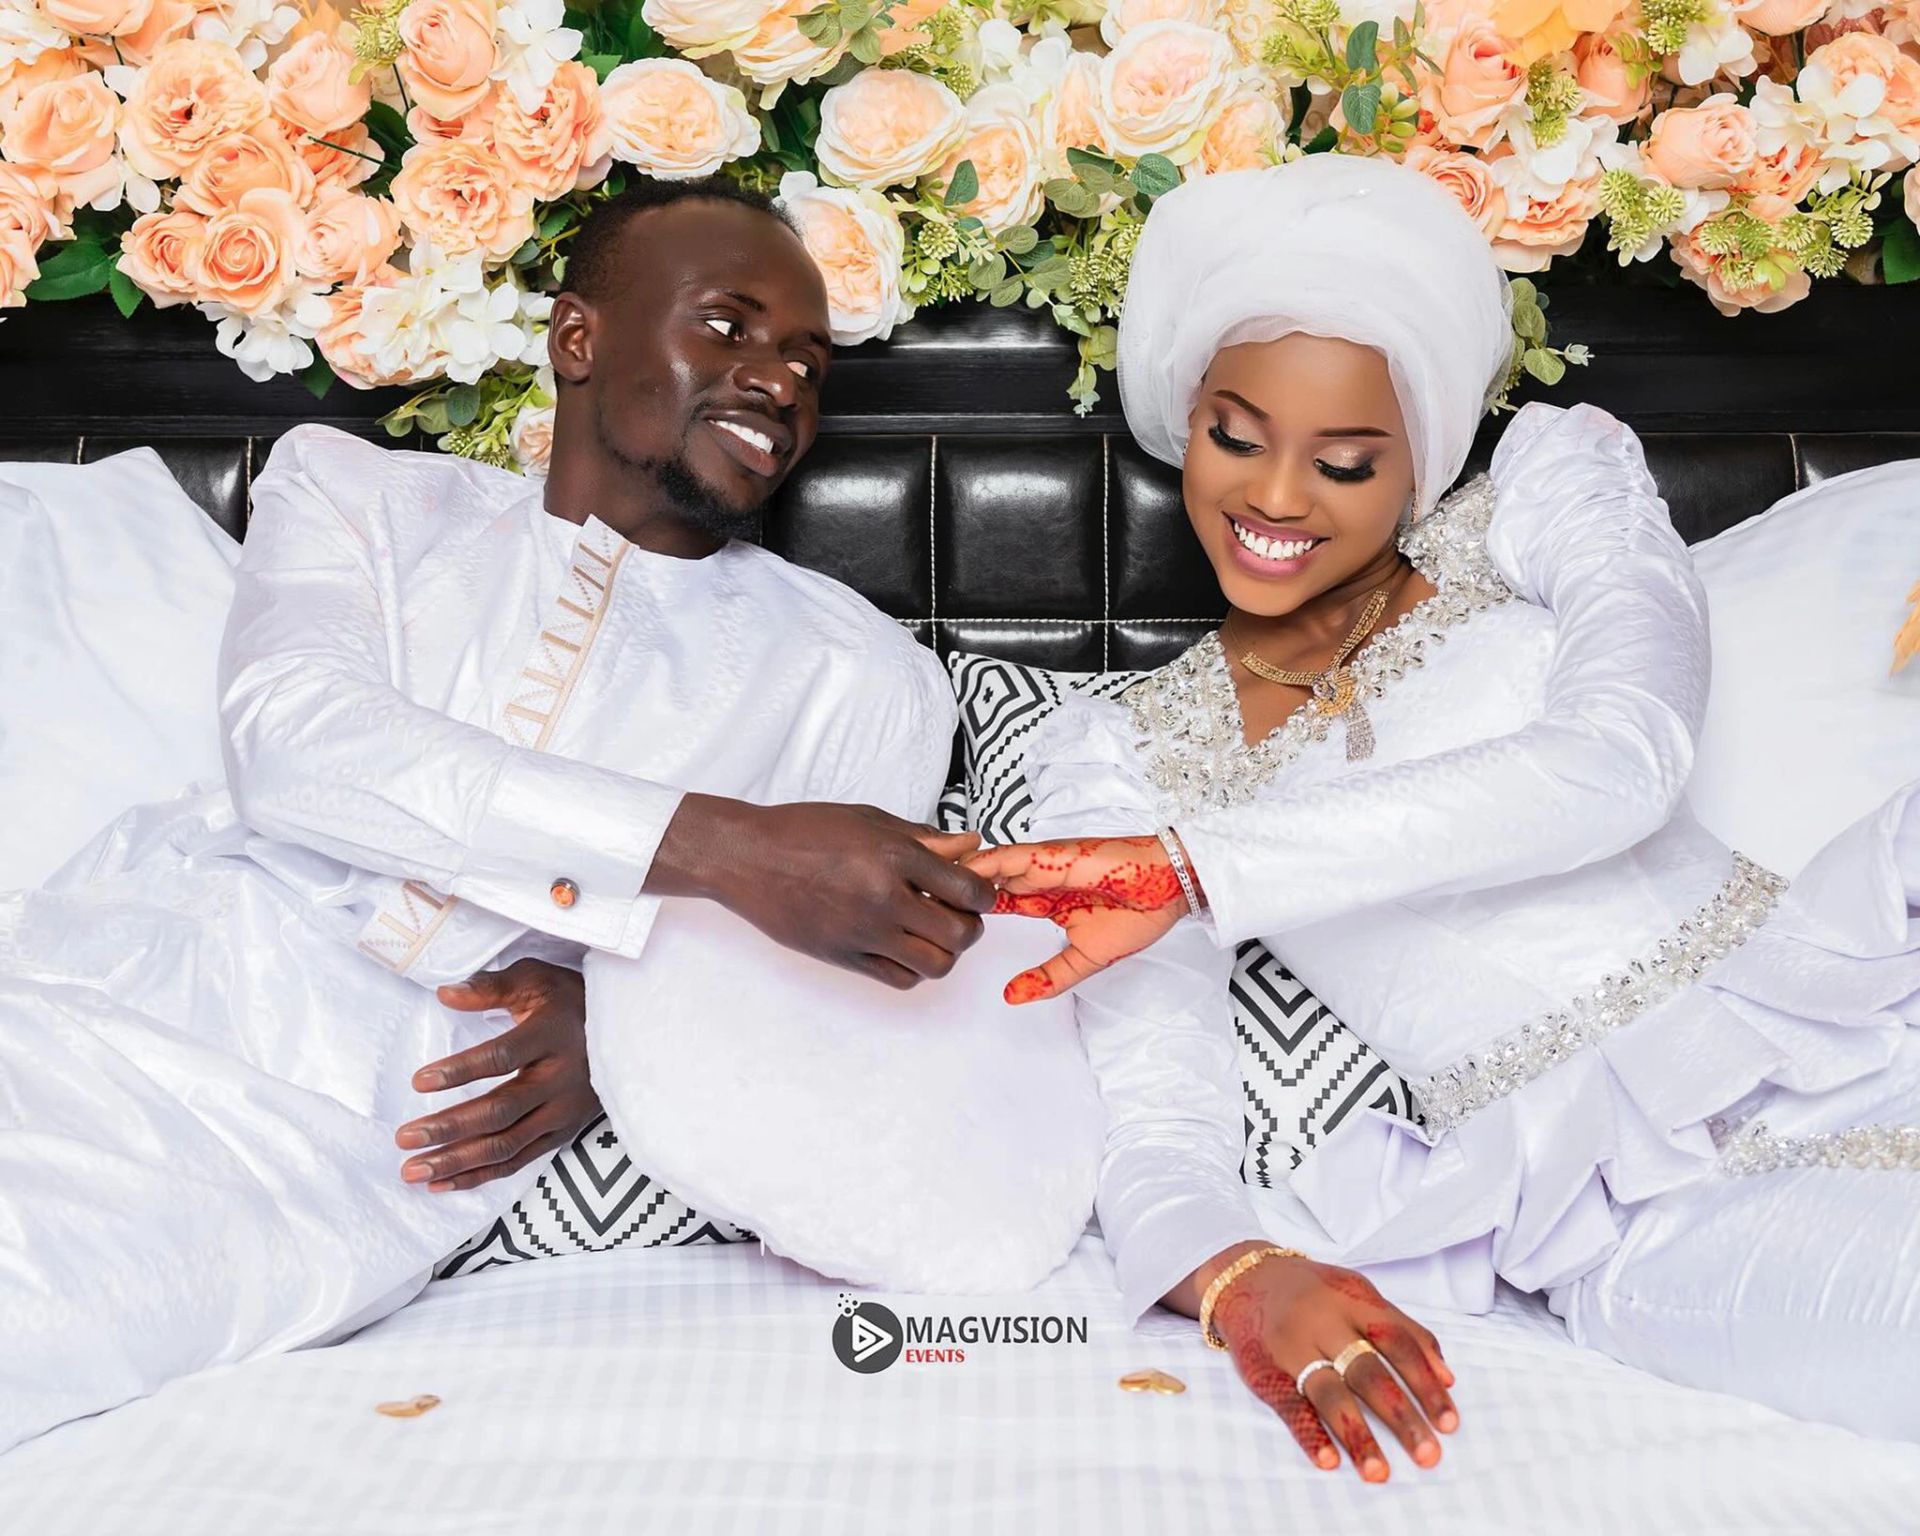 Sadio Mane Ties the Knot: A Football Icon's Humanitarian Heart and Nuptial  Bliss — Tech and Biz News